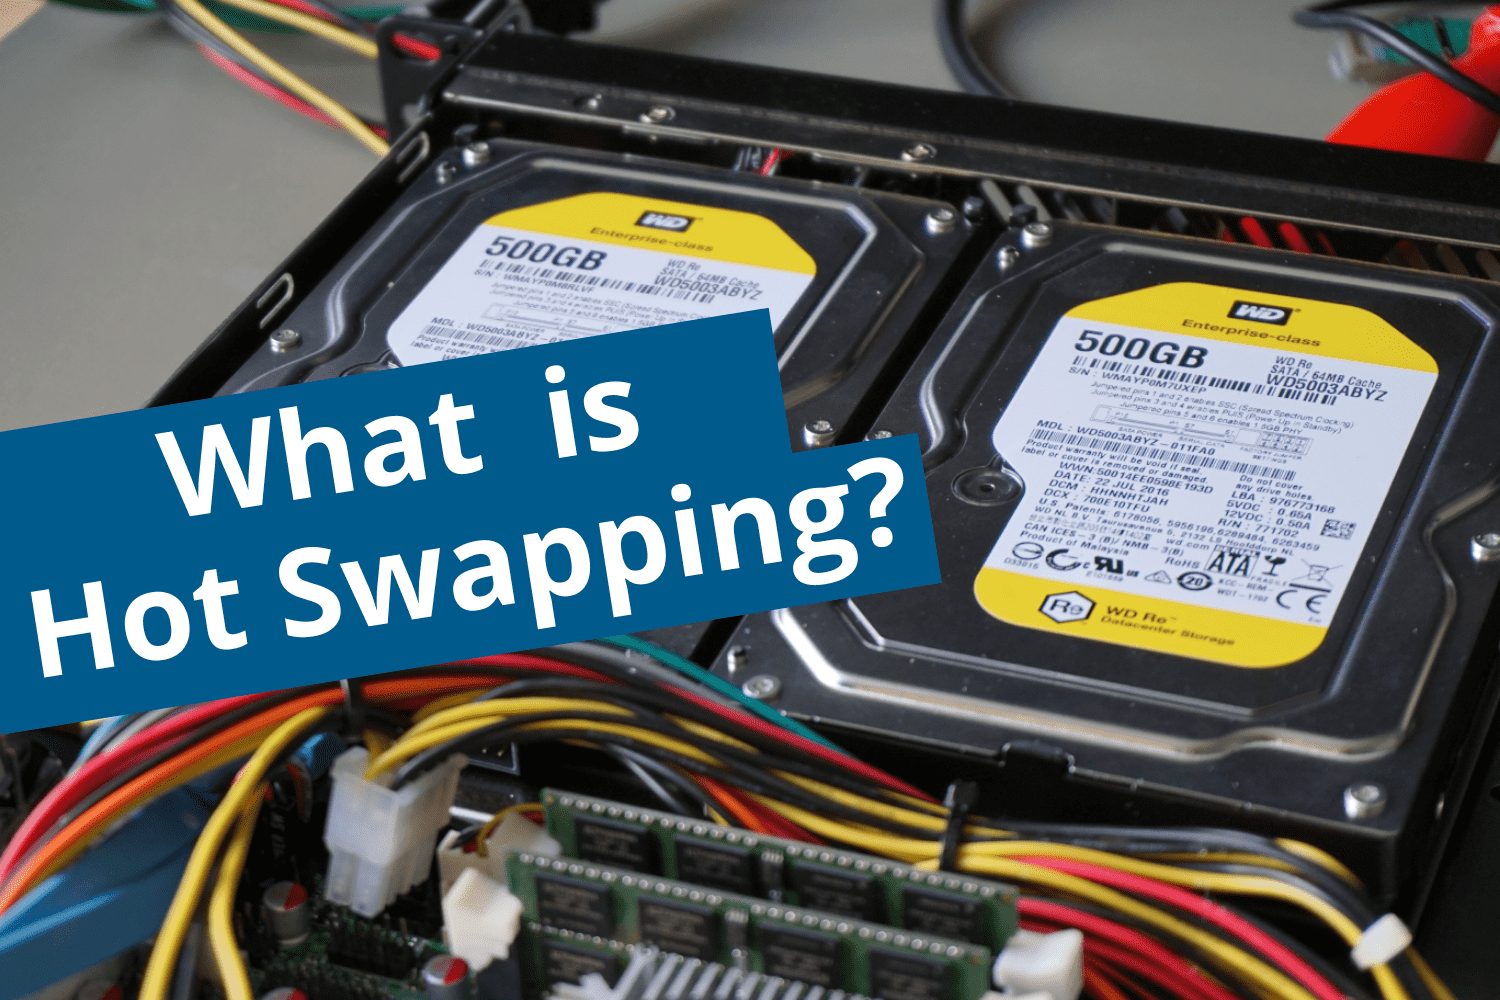 What is hot swapping? What devices is hot-swappable?